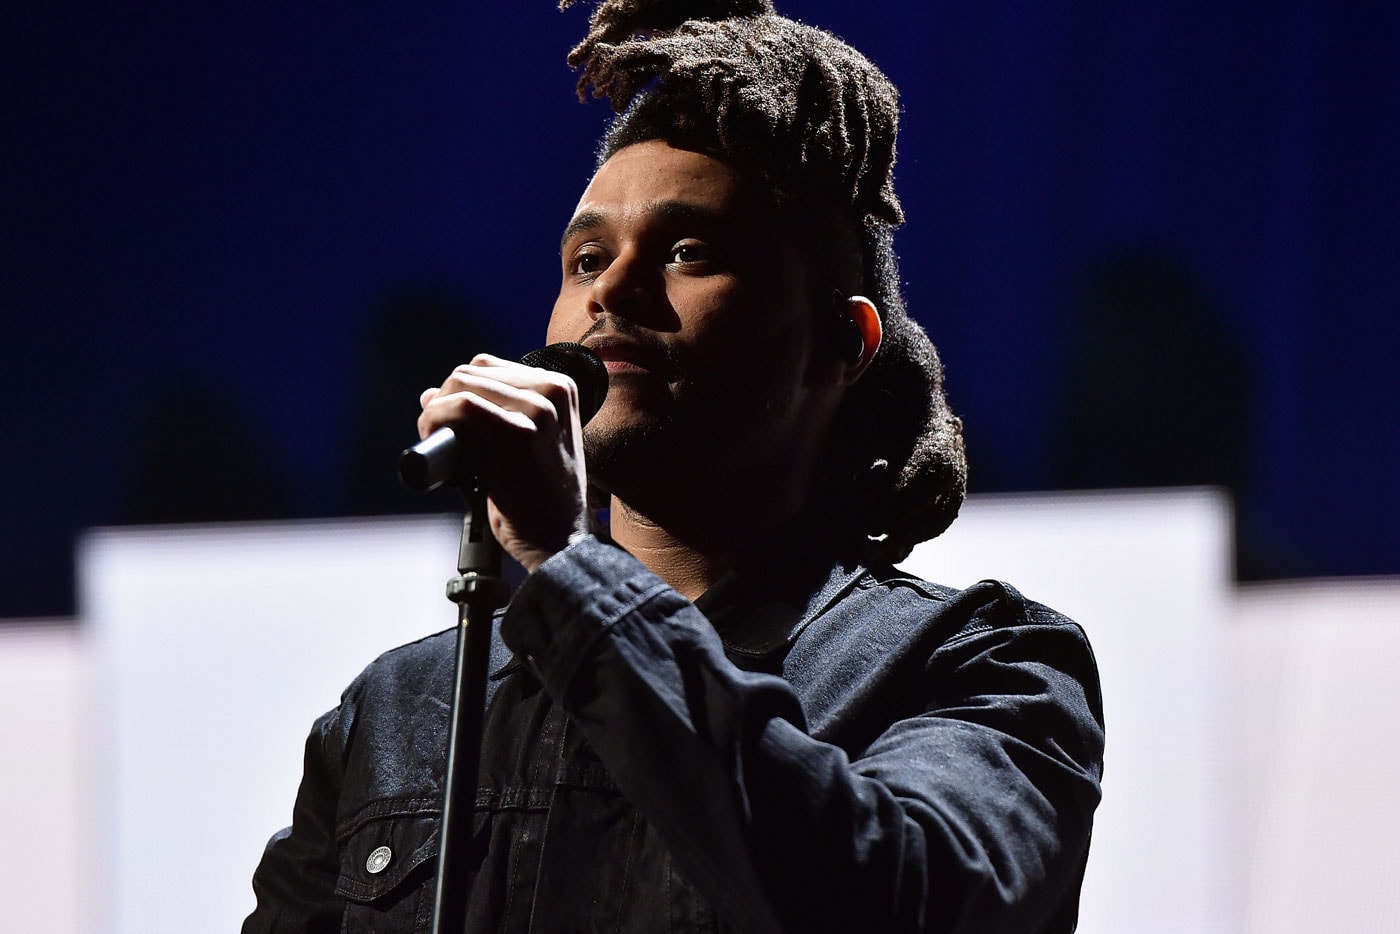 All About The Weeknd's Relationship With Apple and Personal Branding